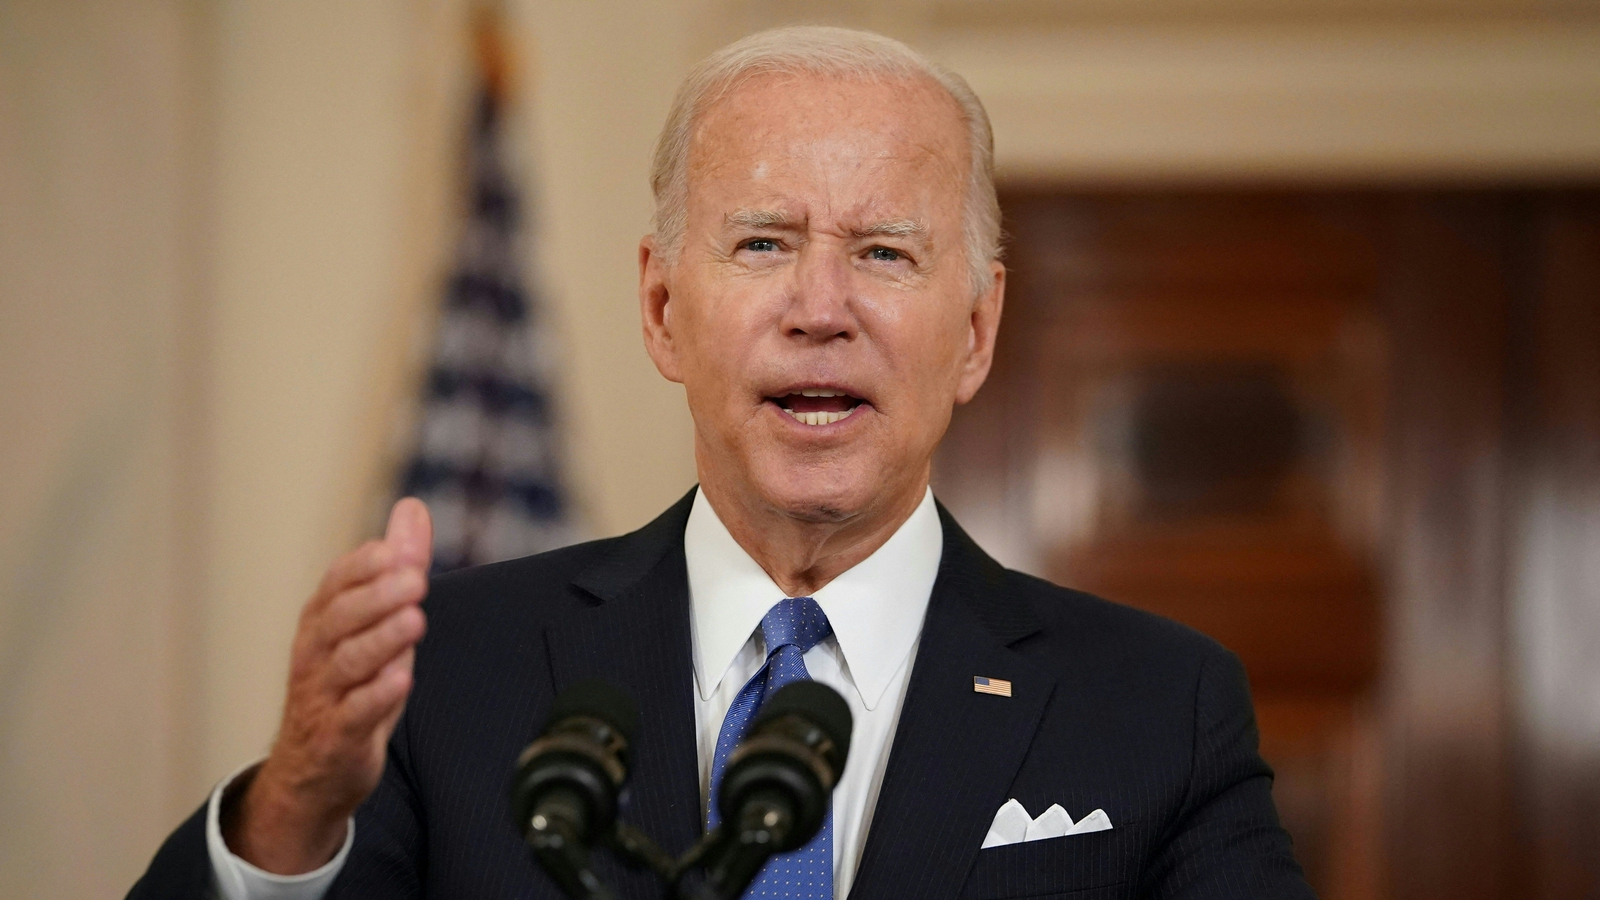 Biden says women's lives 'now at risk' after ruling